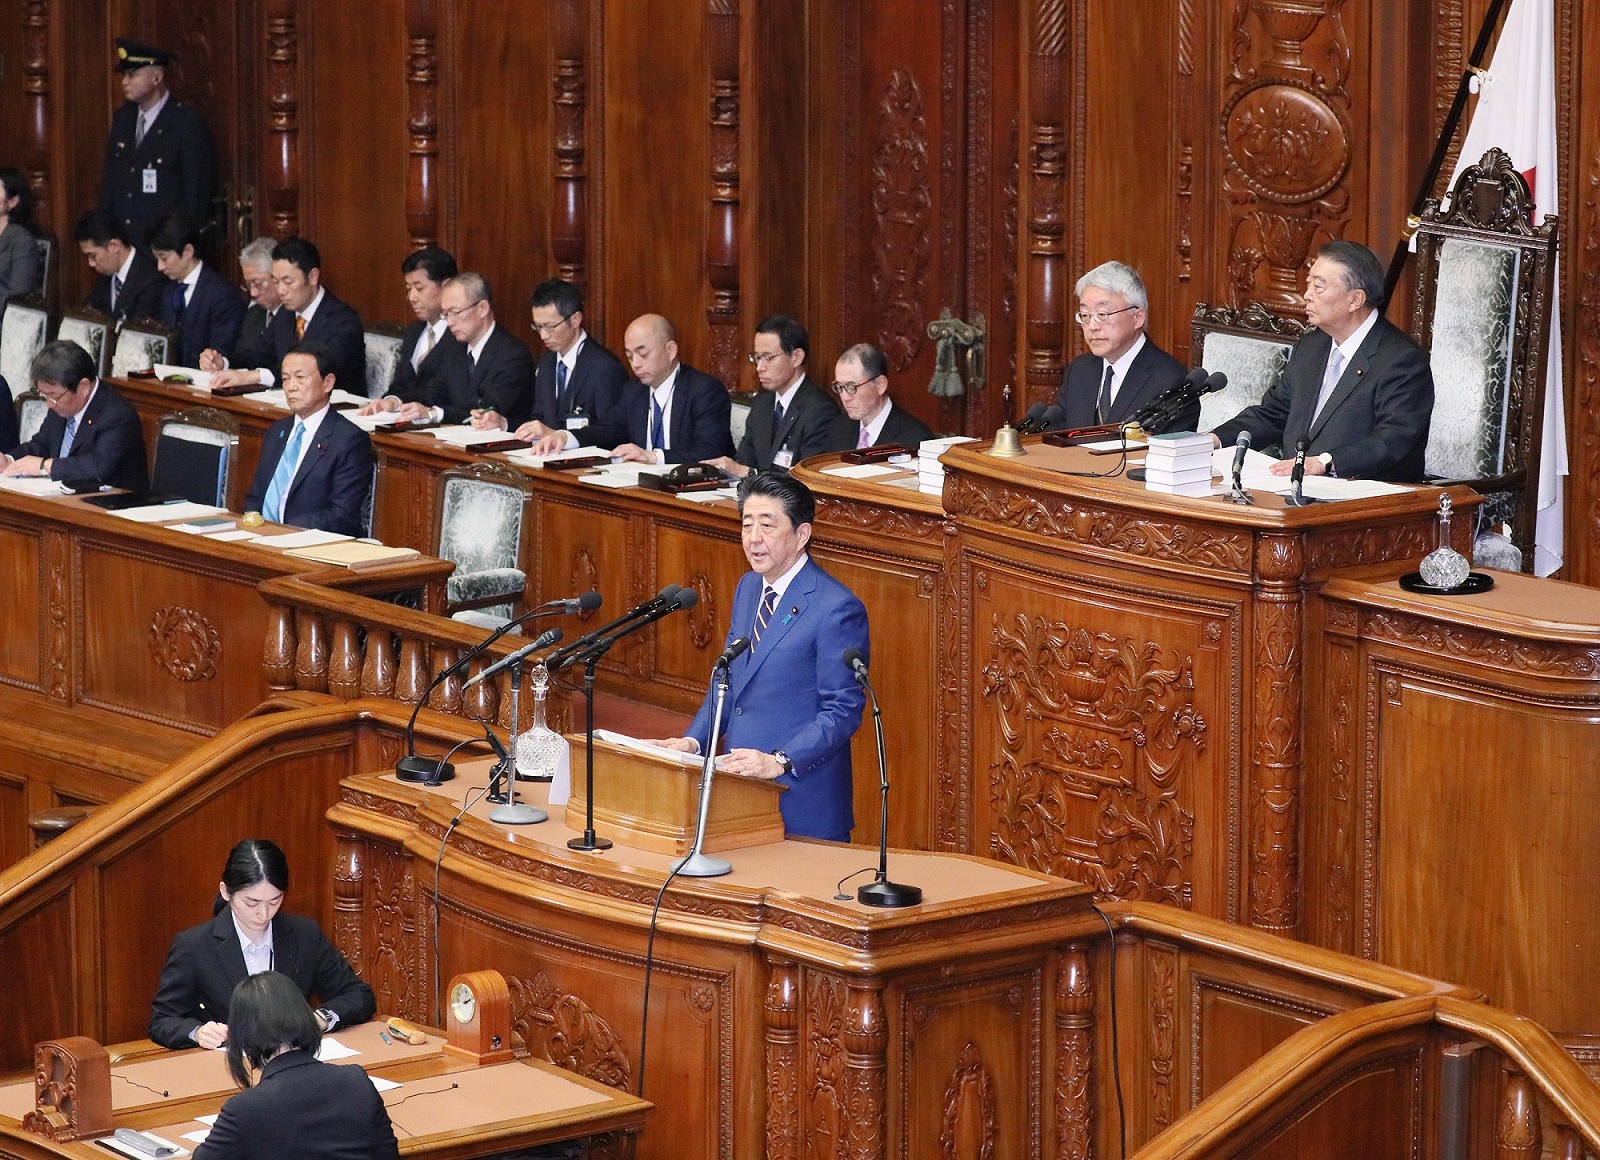 Photograph of the Prime Minister delivering a policy speech during the plenary session of the House of Representatives (9)